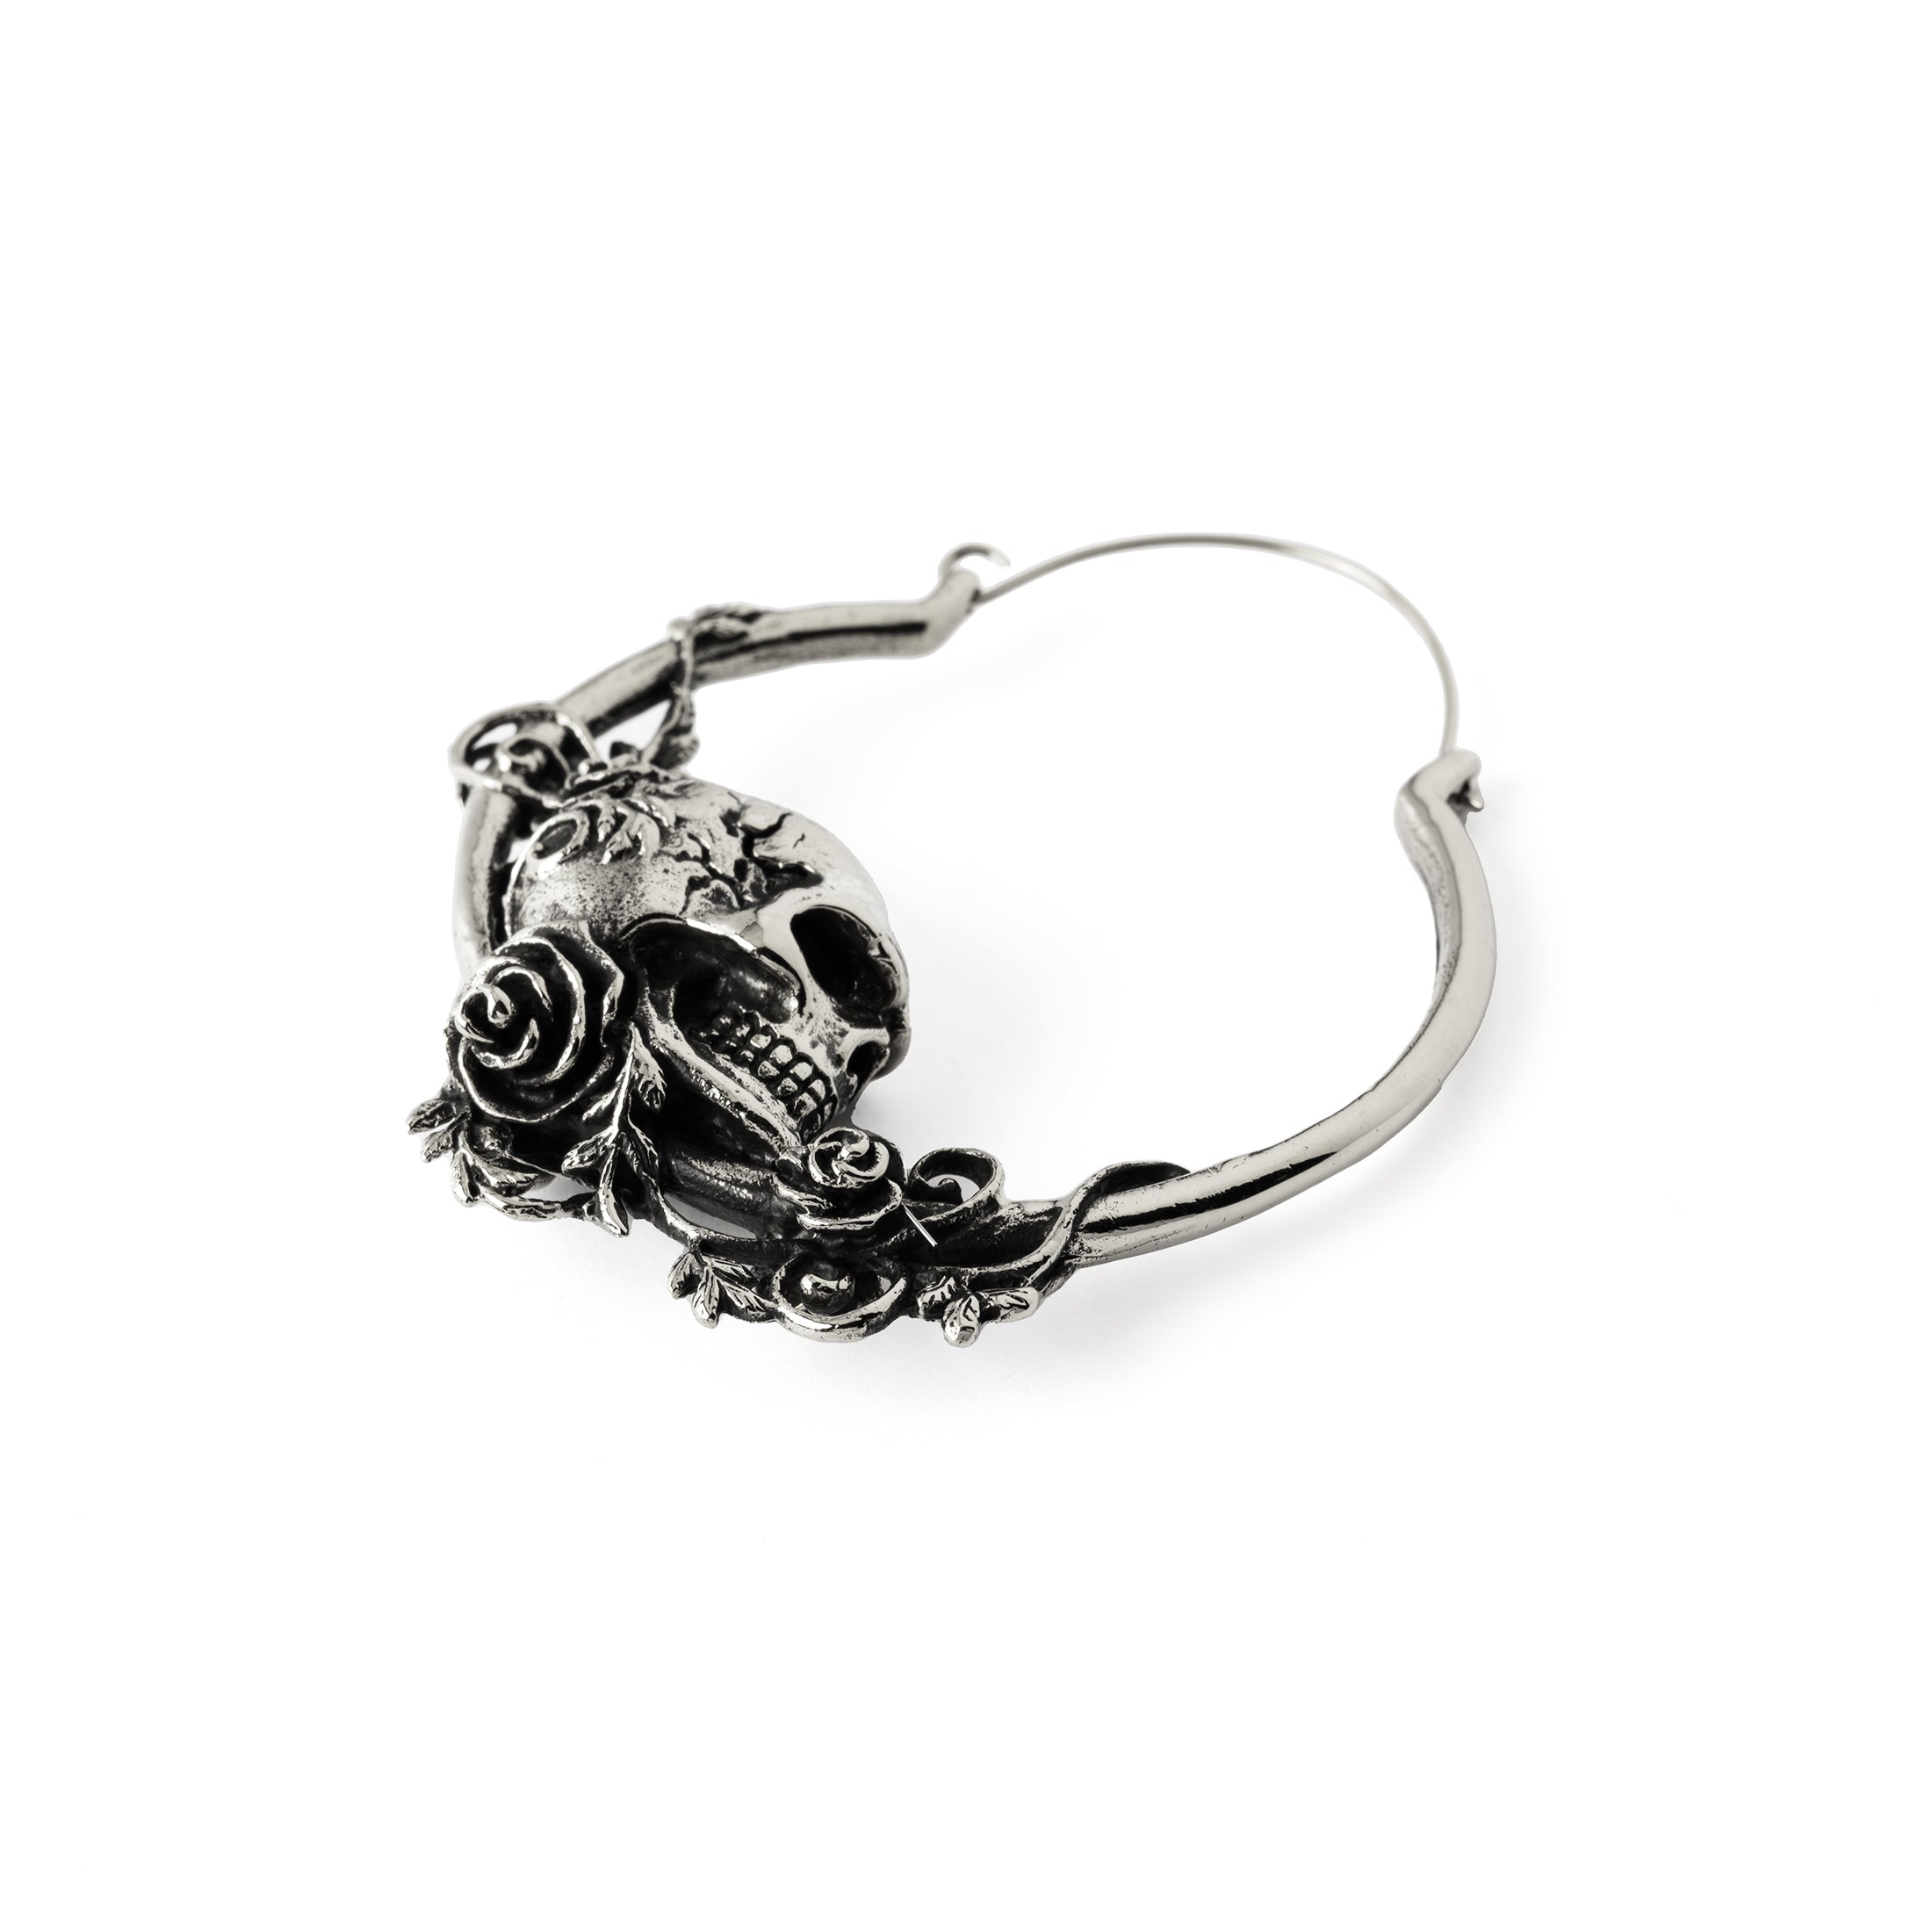 Immortal skull hoop earrings down and front view